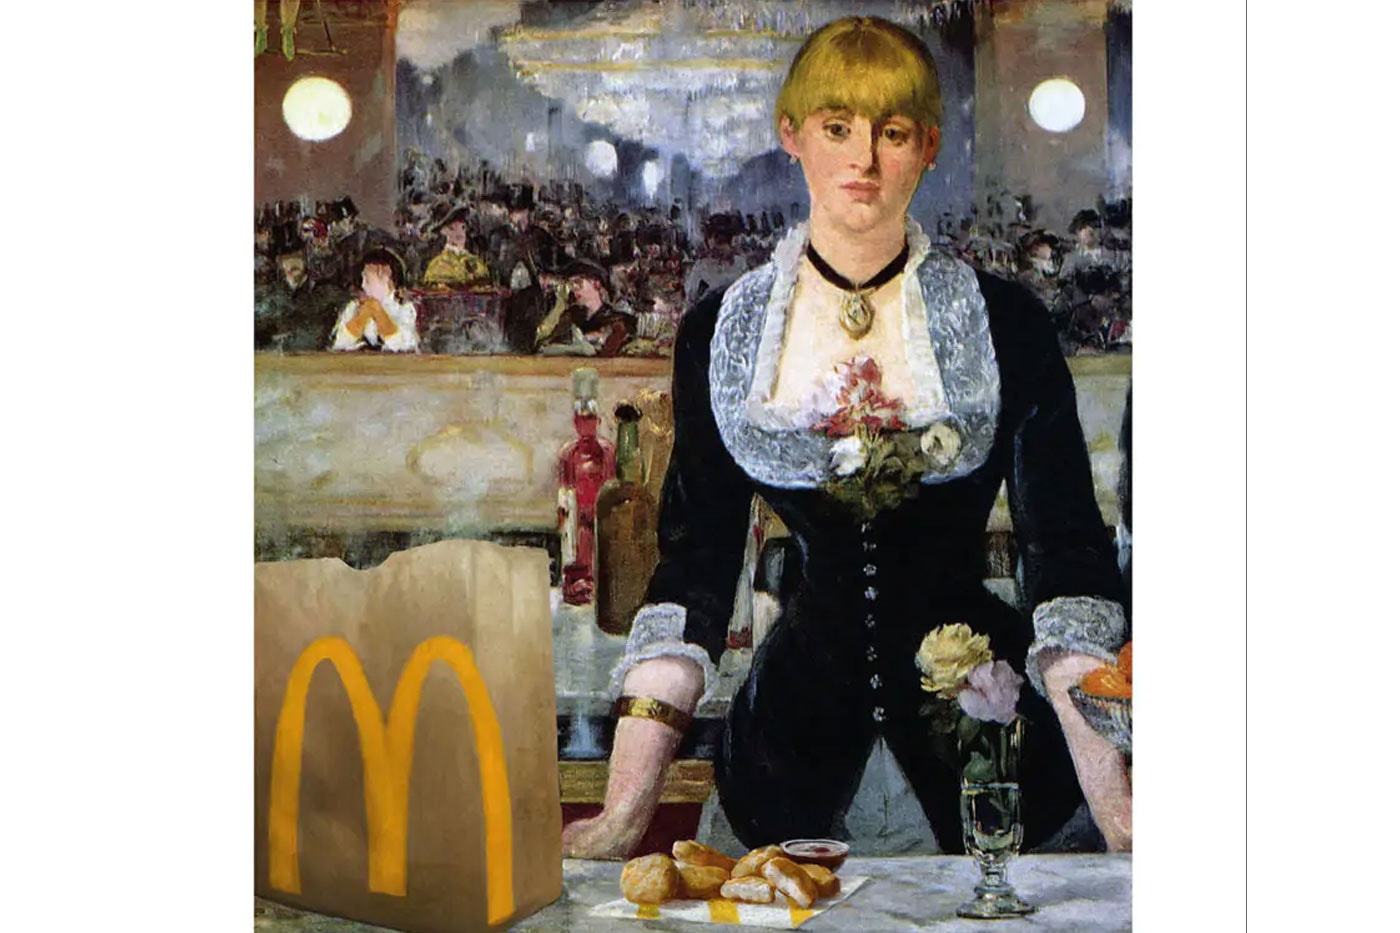 McDonald's Meant to be Classic Ad Campaign impressionist painters van gogh renoir manet modern art fast food mcnuggets large coke images advertisement 